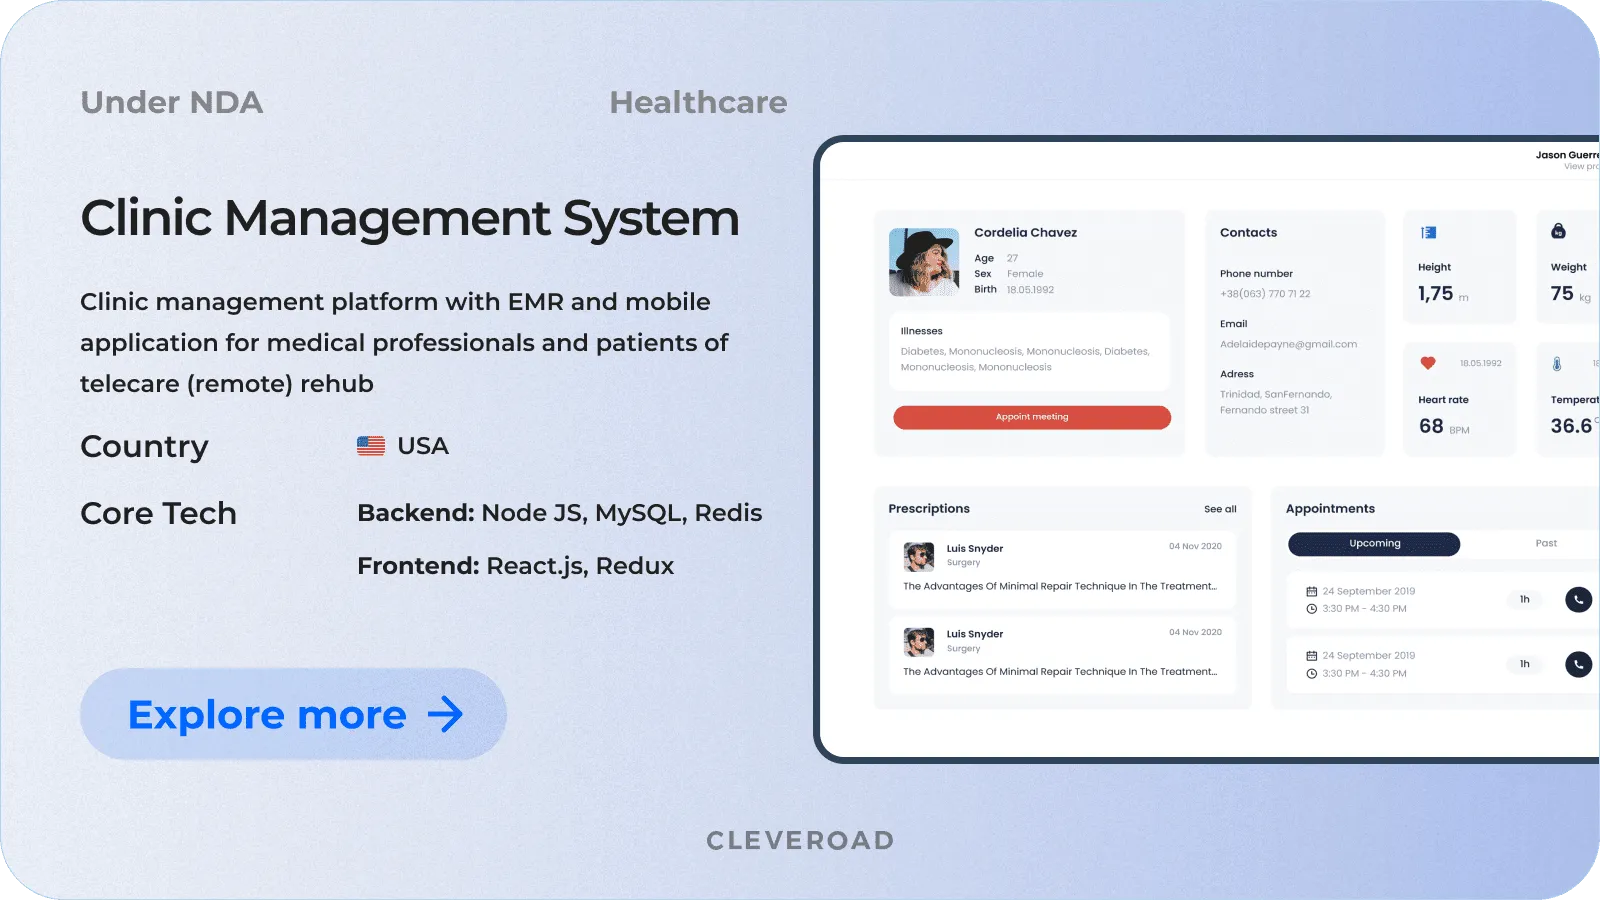 Clinic management system created by Cleveroad